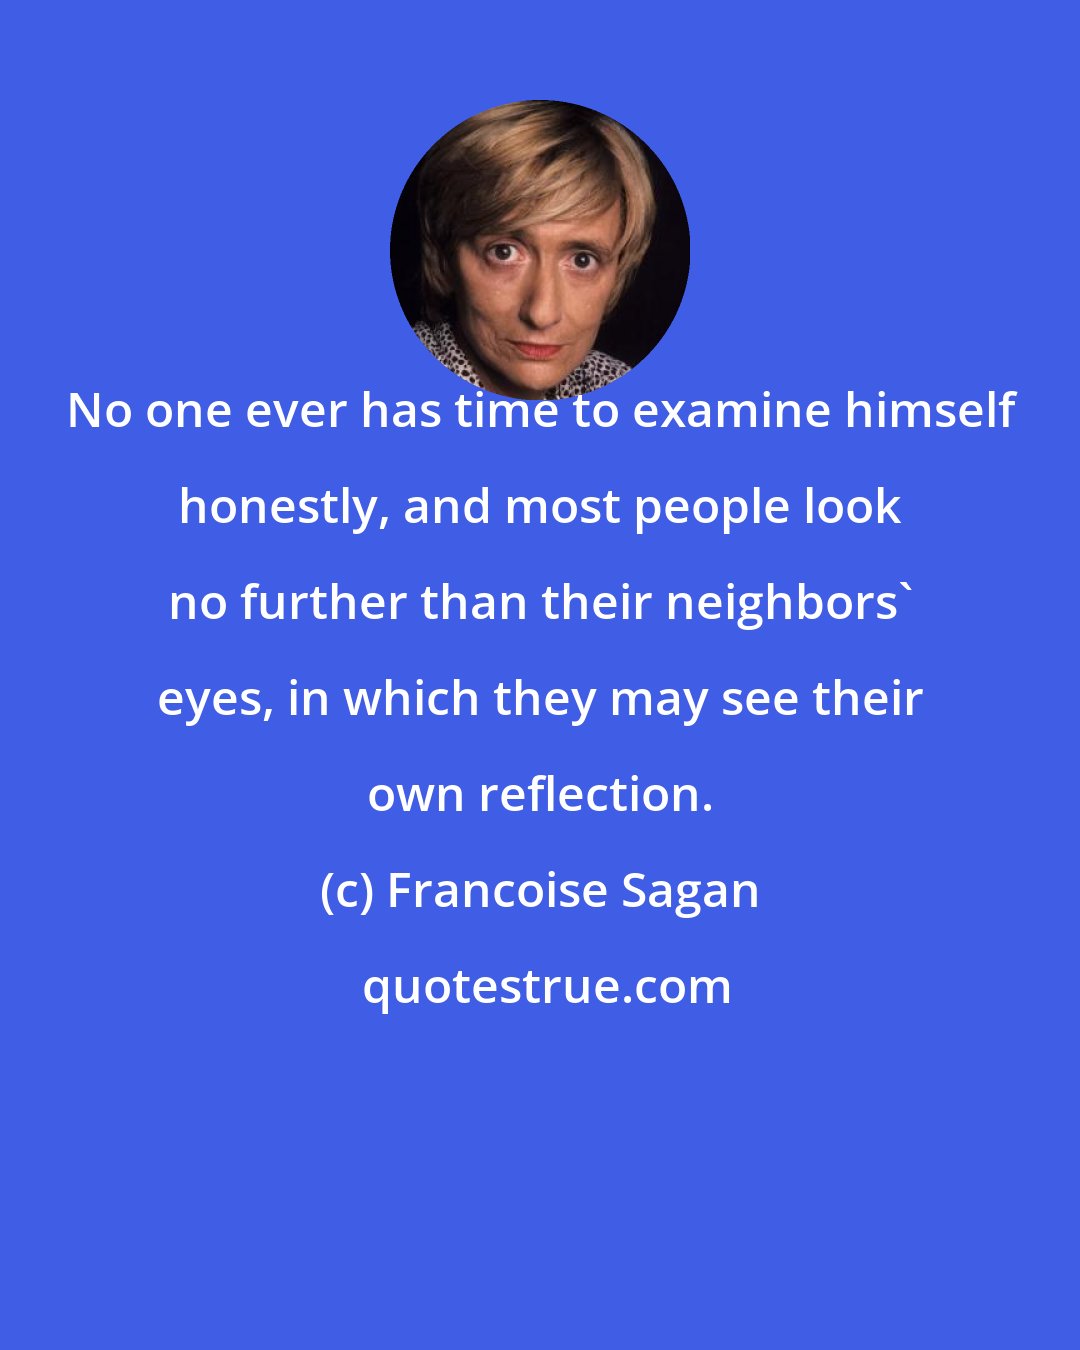 Francoise Sagan: No one ever has time to examine himself honestly, and most people look no further than their neighbors' eyes, in which they may see their own reflection.